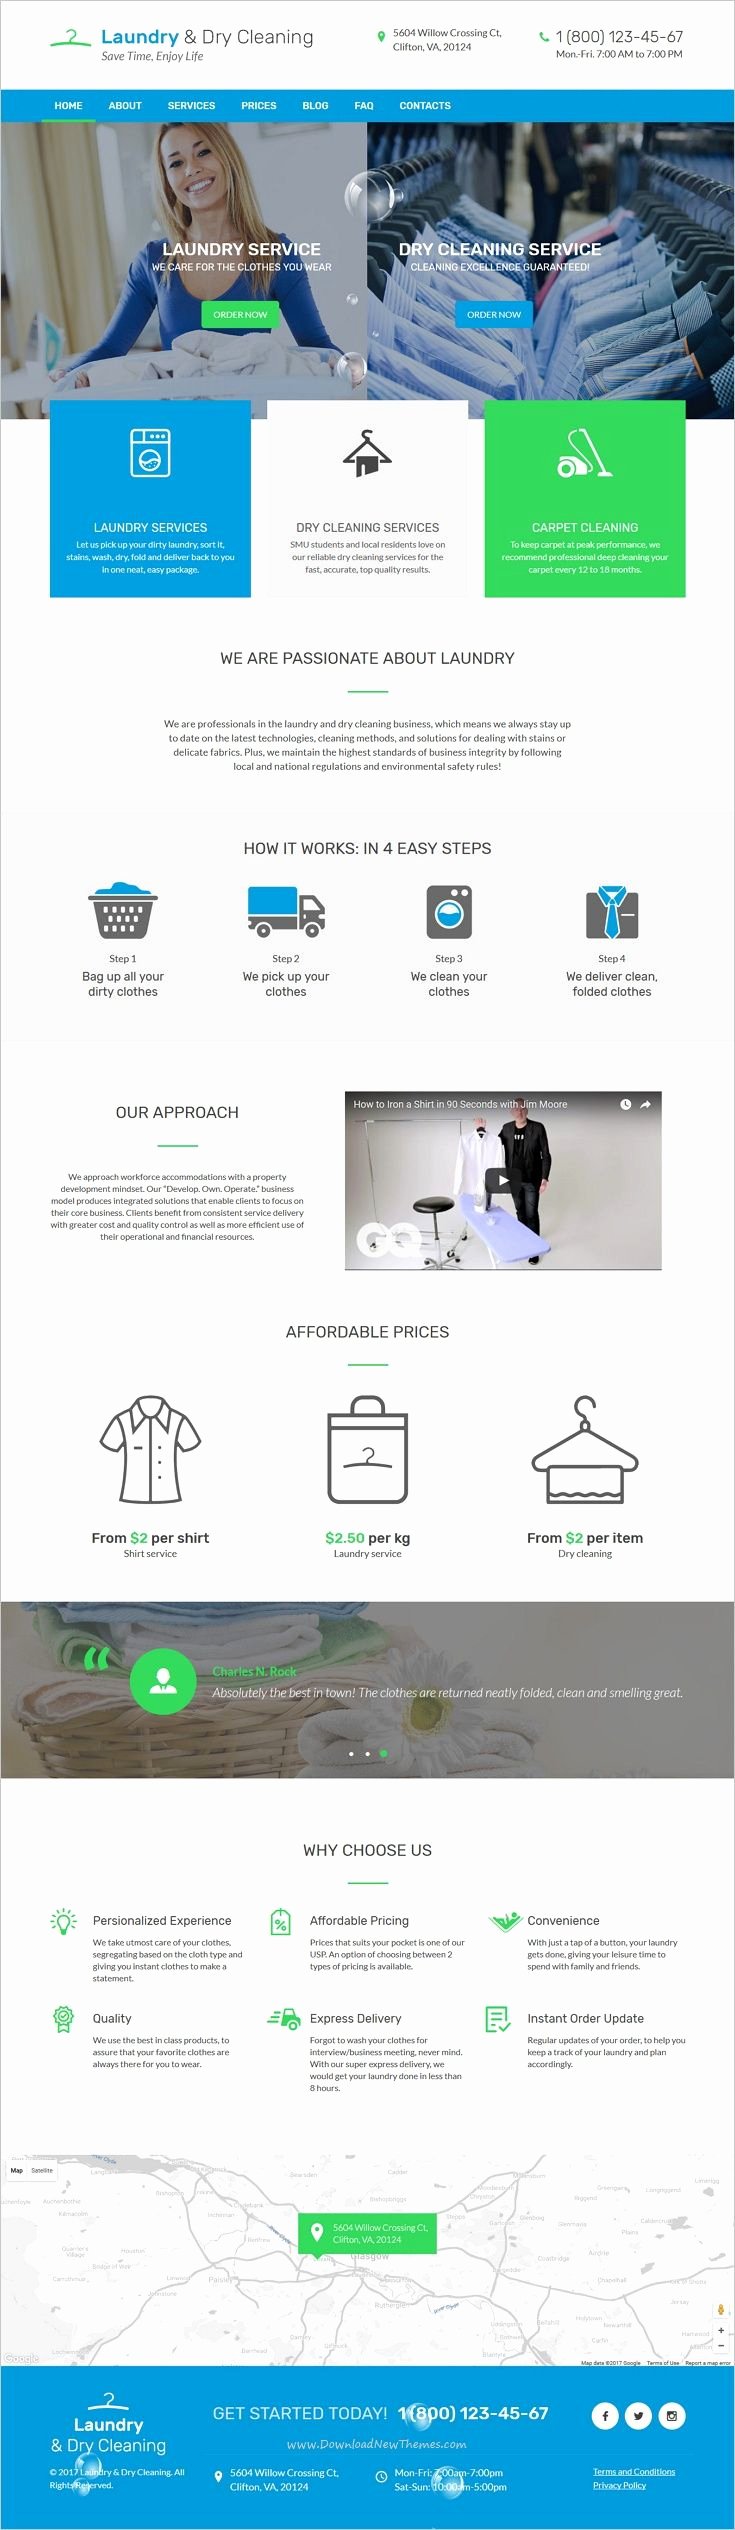 Cleaning Services Website Template New Best 25 Dry Cleaning Services Ideas On Pinterest